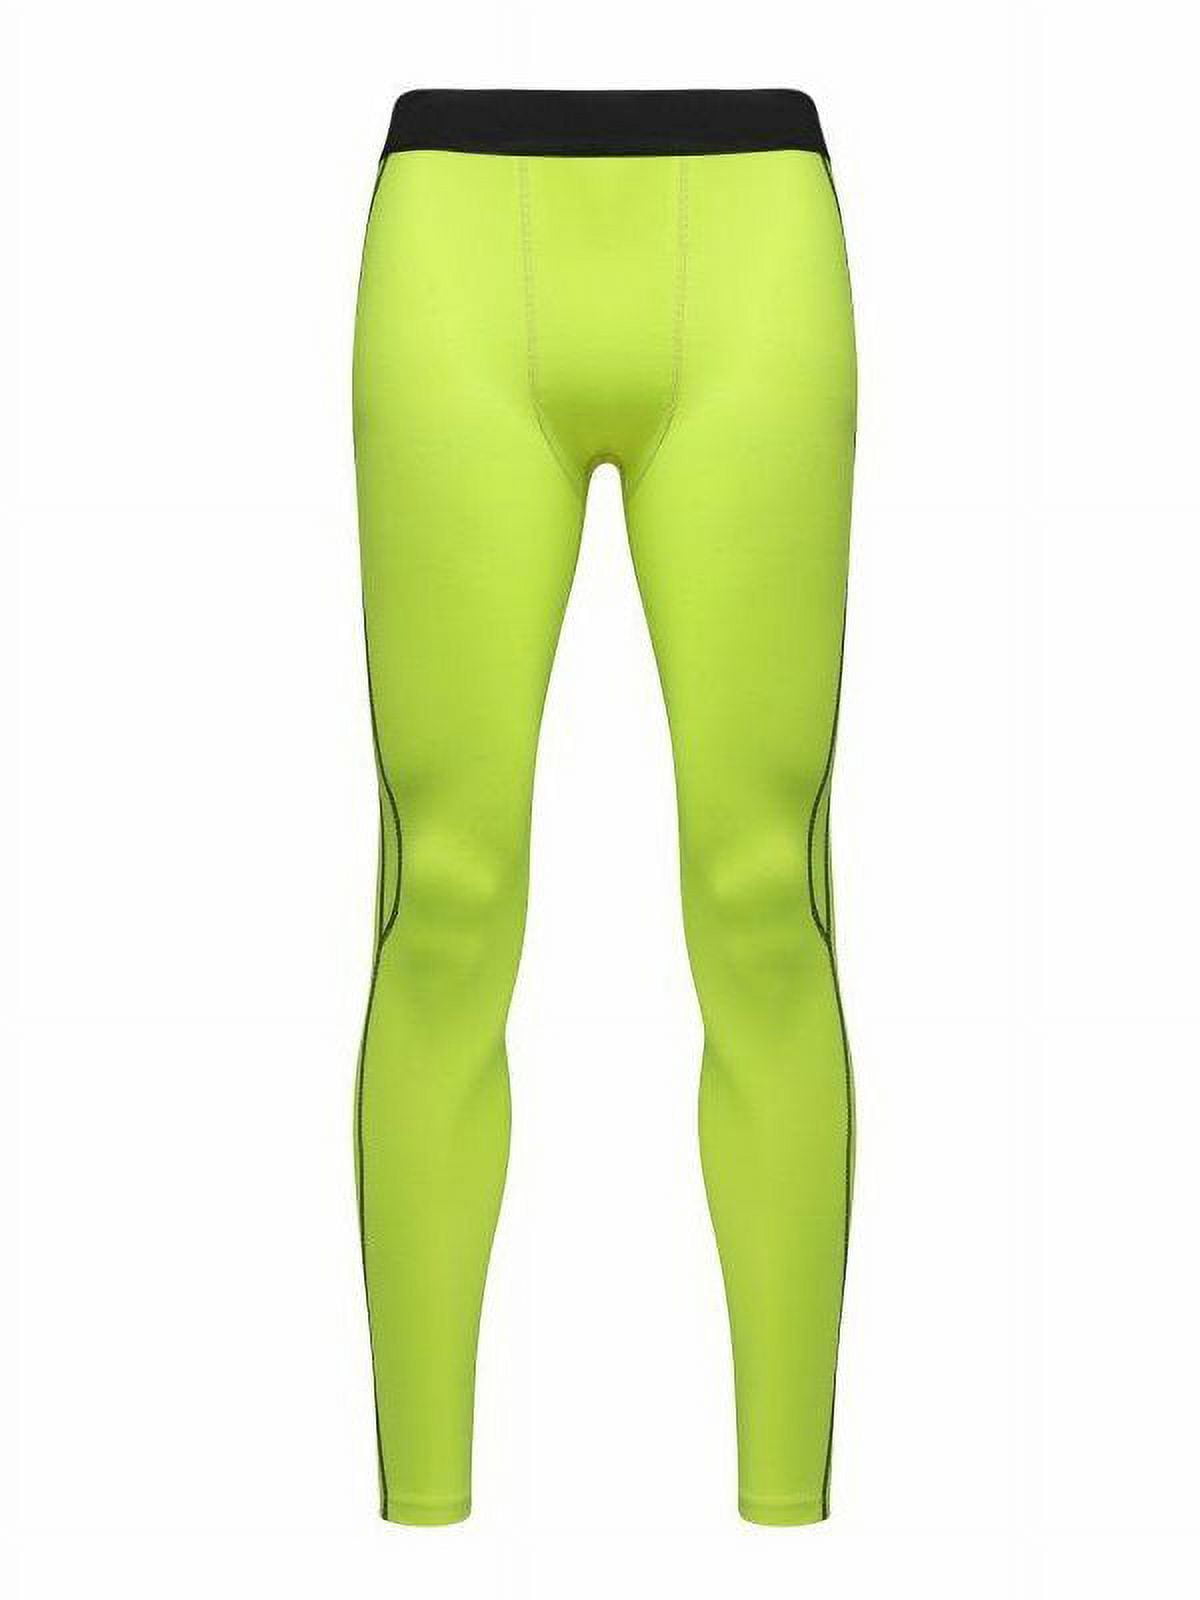 Hue Yellow Tights for men